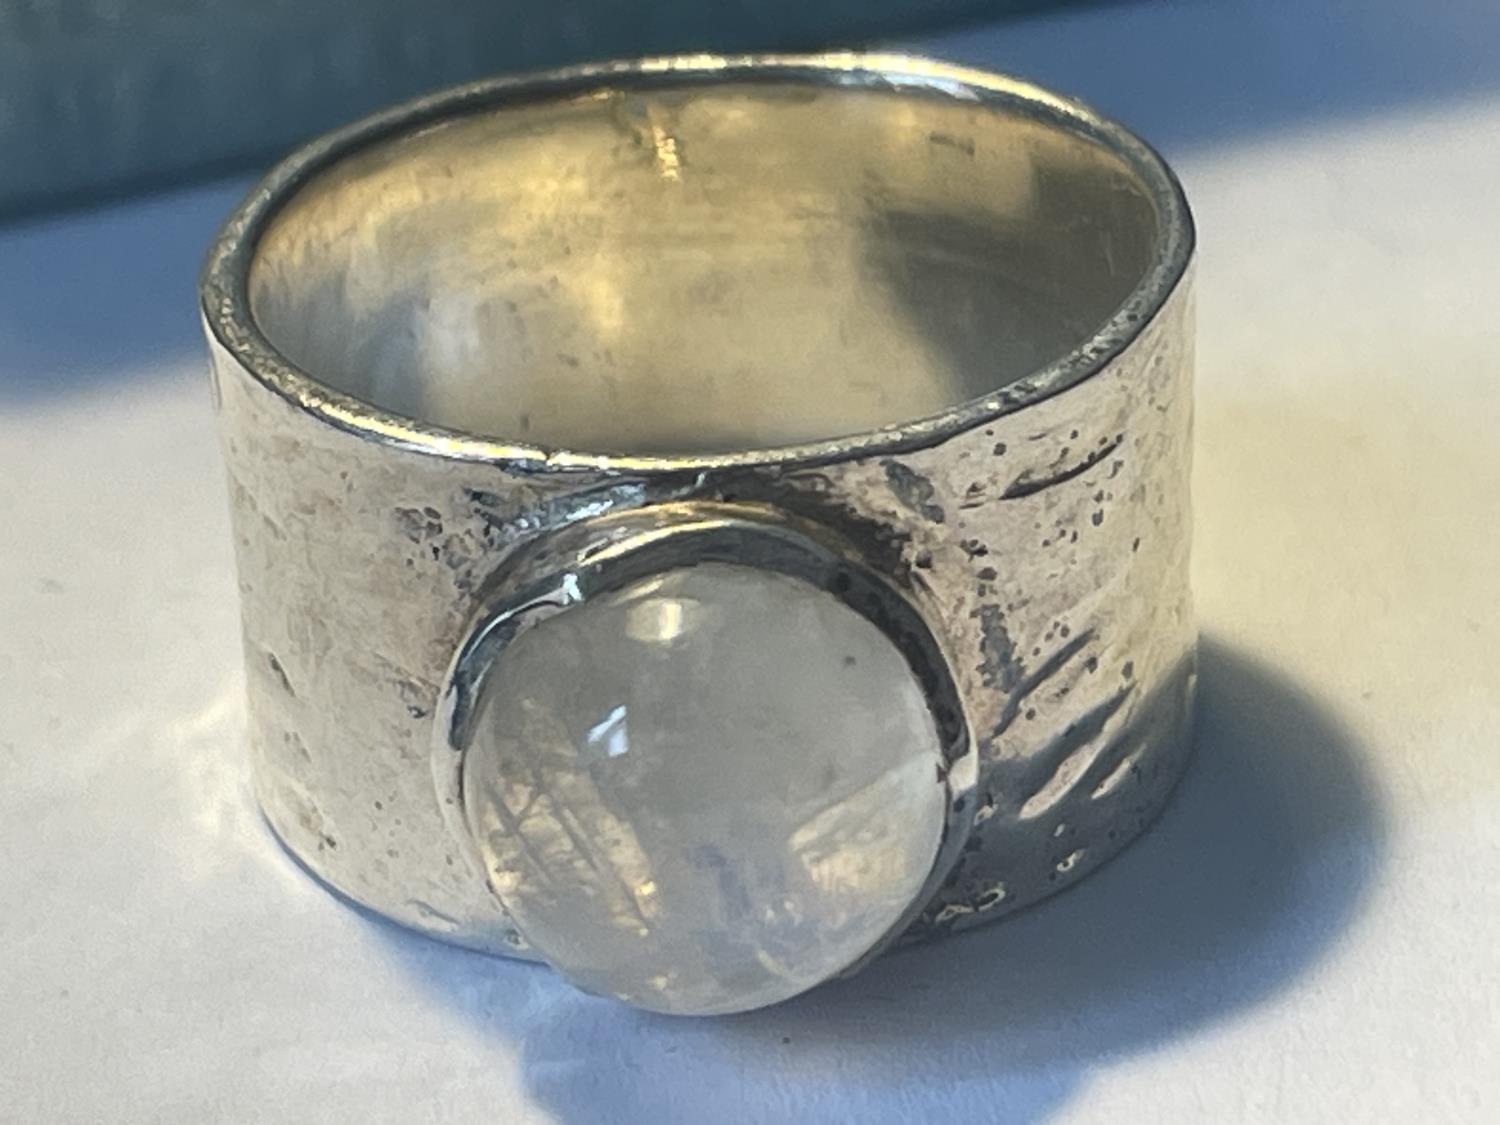 A SILVER RING WITH OPAQUE STONE IN A PRESENTATION BOX - Image 2 of 4